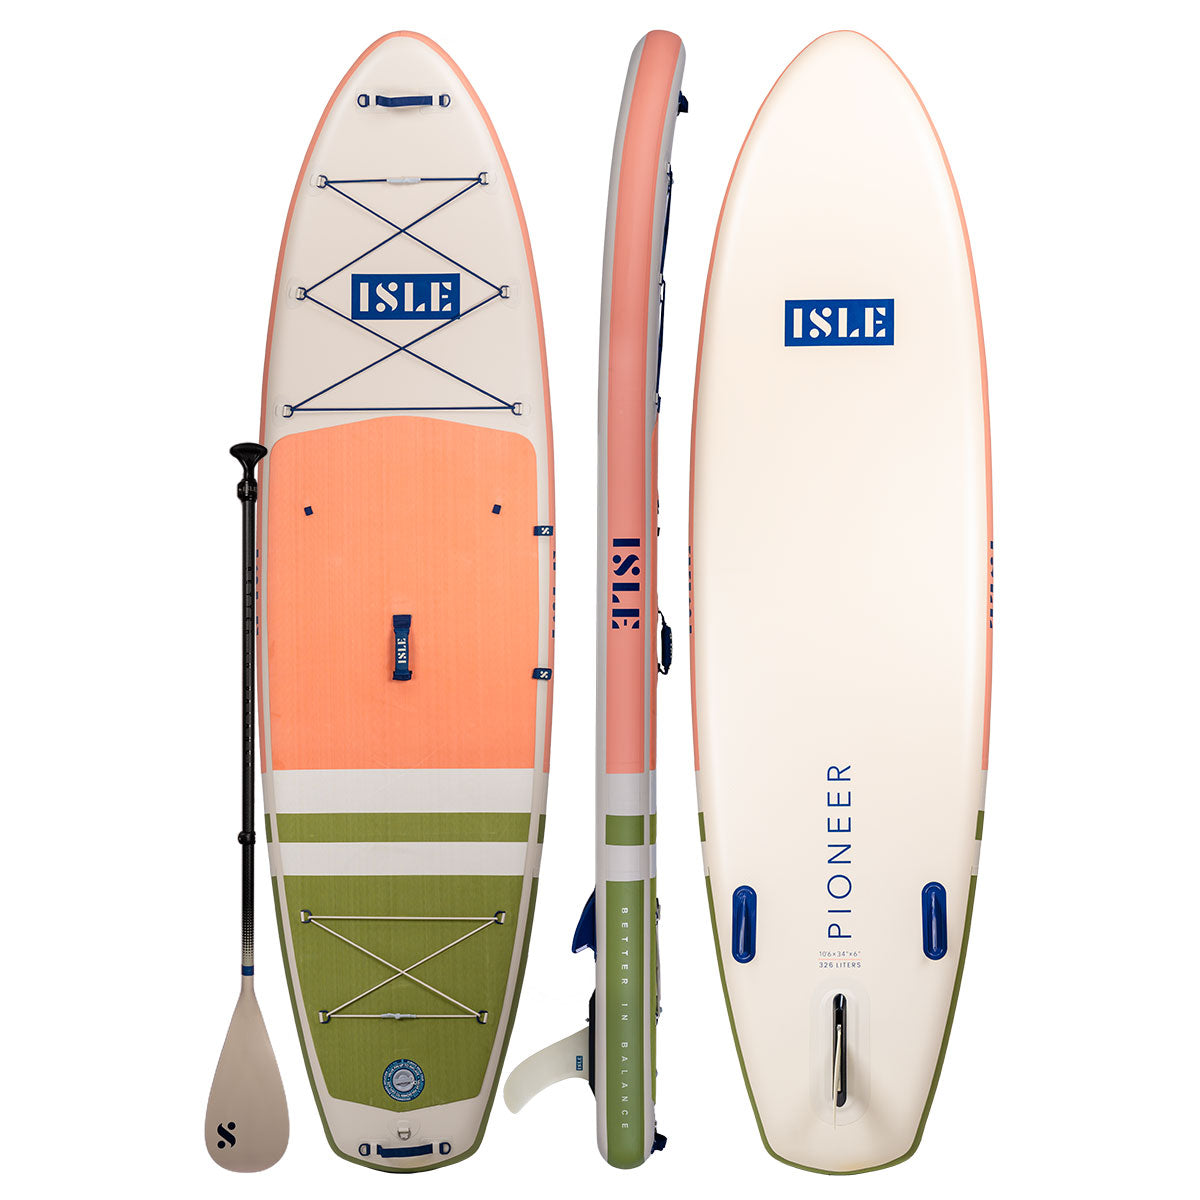 Pioneer 2.0 Inflatable Paddle Board in Peach/Moss